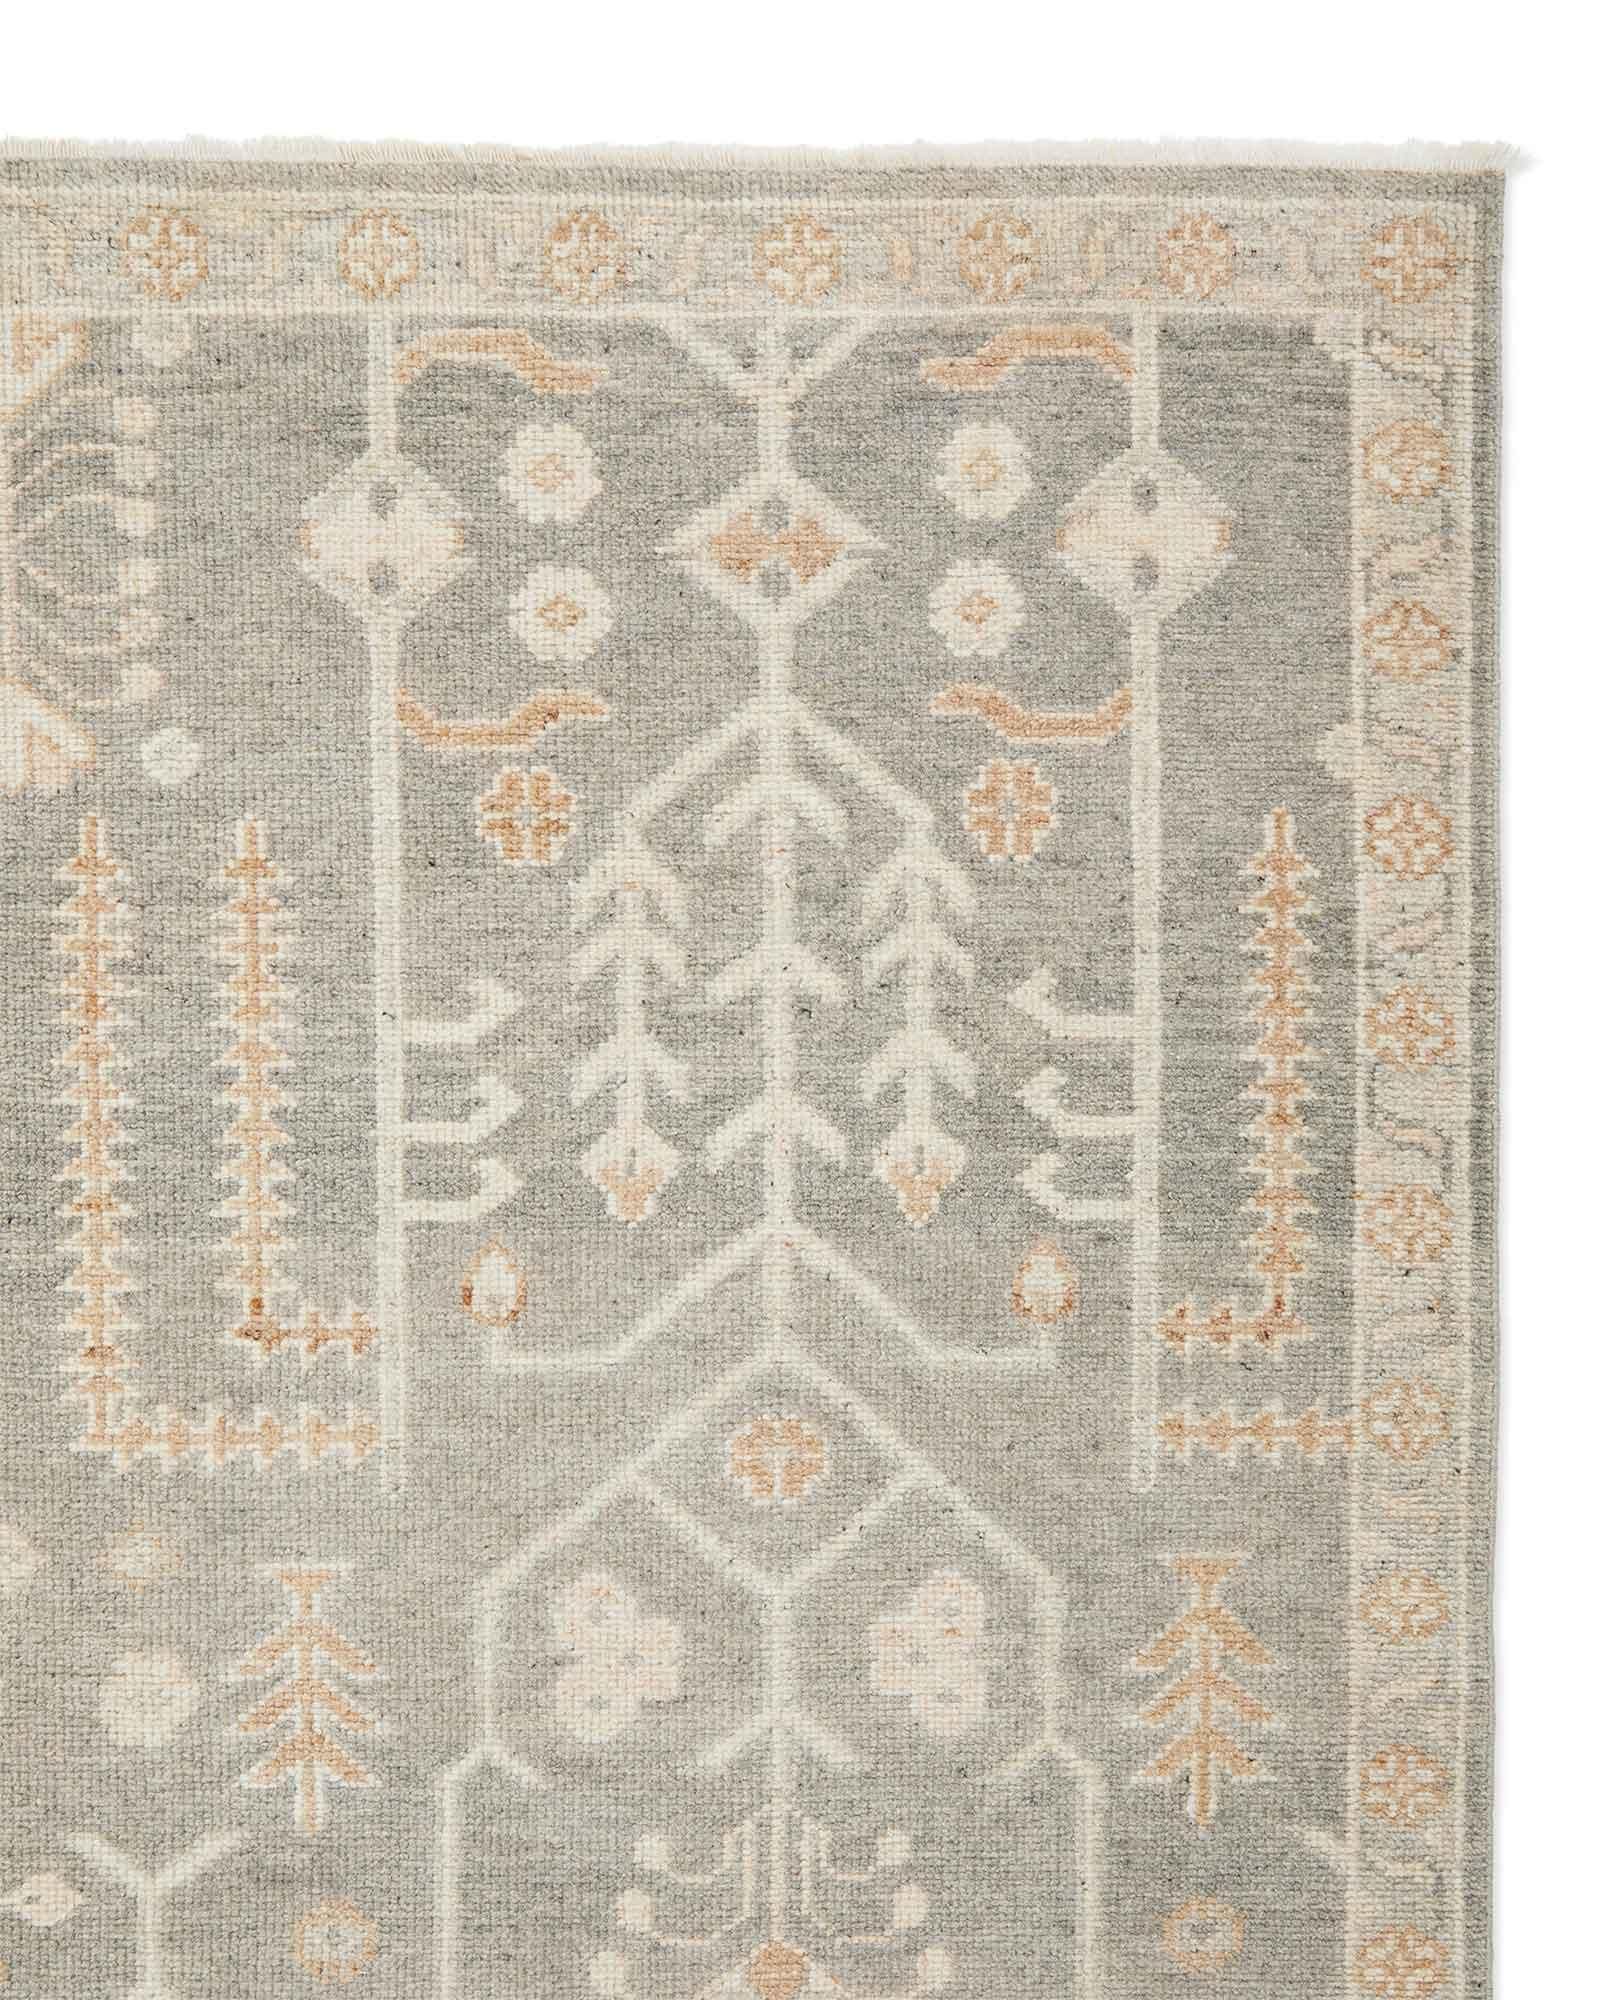 Yountville Rug | Serena and Lily